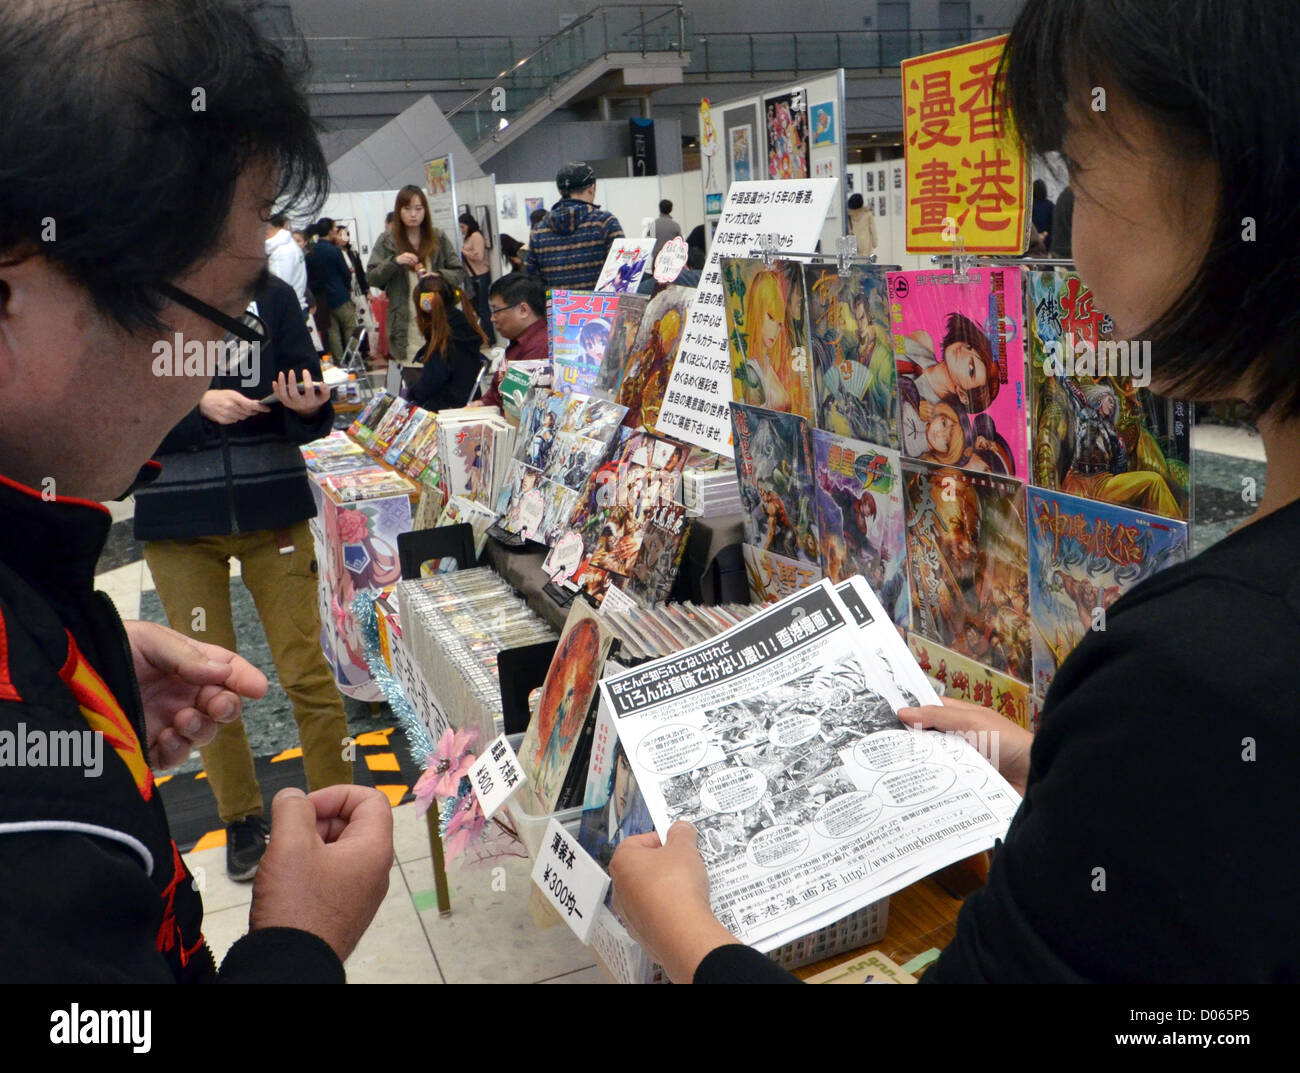 November 18, 2012, Tokyo, Japan - The International Comic Festa, a one-day event bringing together comic books from Europe, East Asia and North America, the first of its kind in Japan, gets underway in Tokyo on Sunday, November 18, 2012.. Four major 'bande dessinee' publishers from France and Belgium also joined the event, as well as the largest U.S. comic publisher, Marvel Entertainment LLC. 'Akira' creator Katsuhiro Otomo was featured in a talk show, the highlight of the Manga festival.  (Photo by Natsuki Sakai/AFLO) Stock Photo